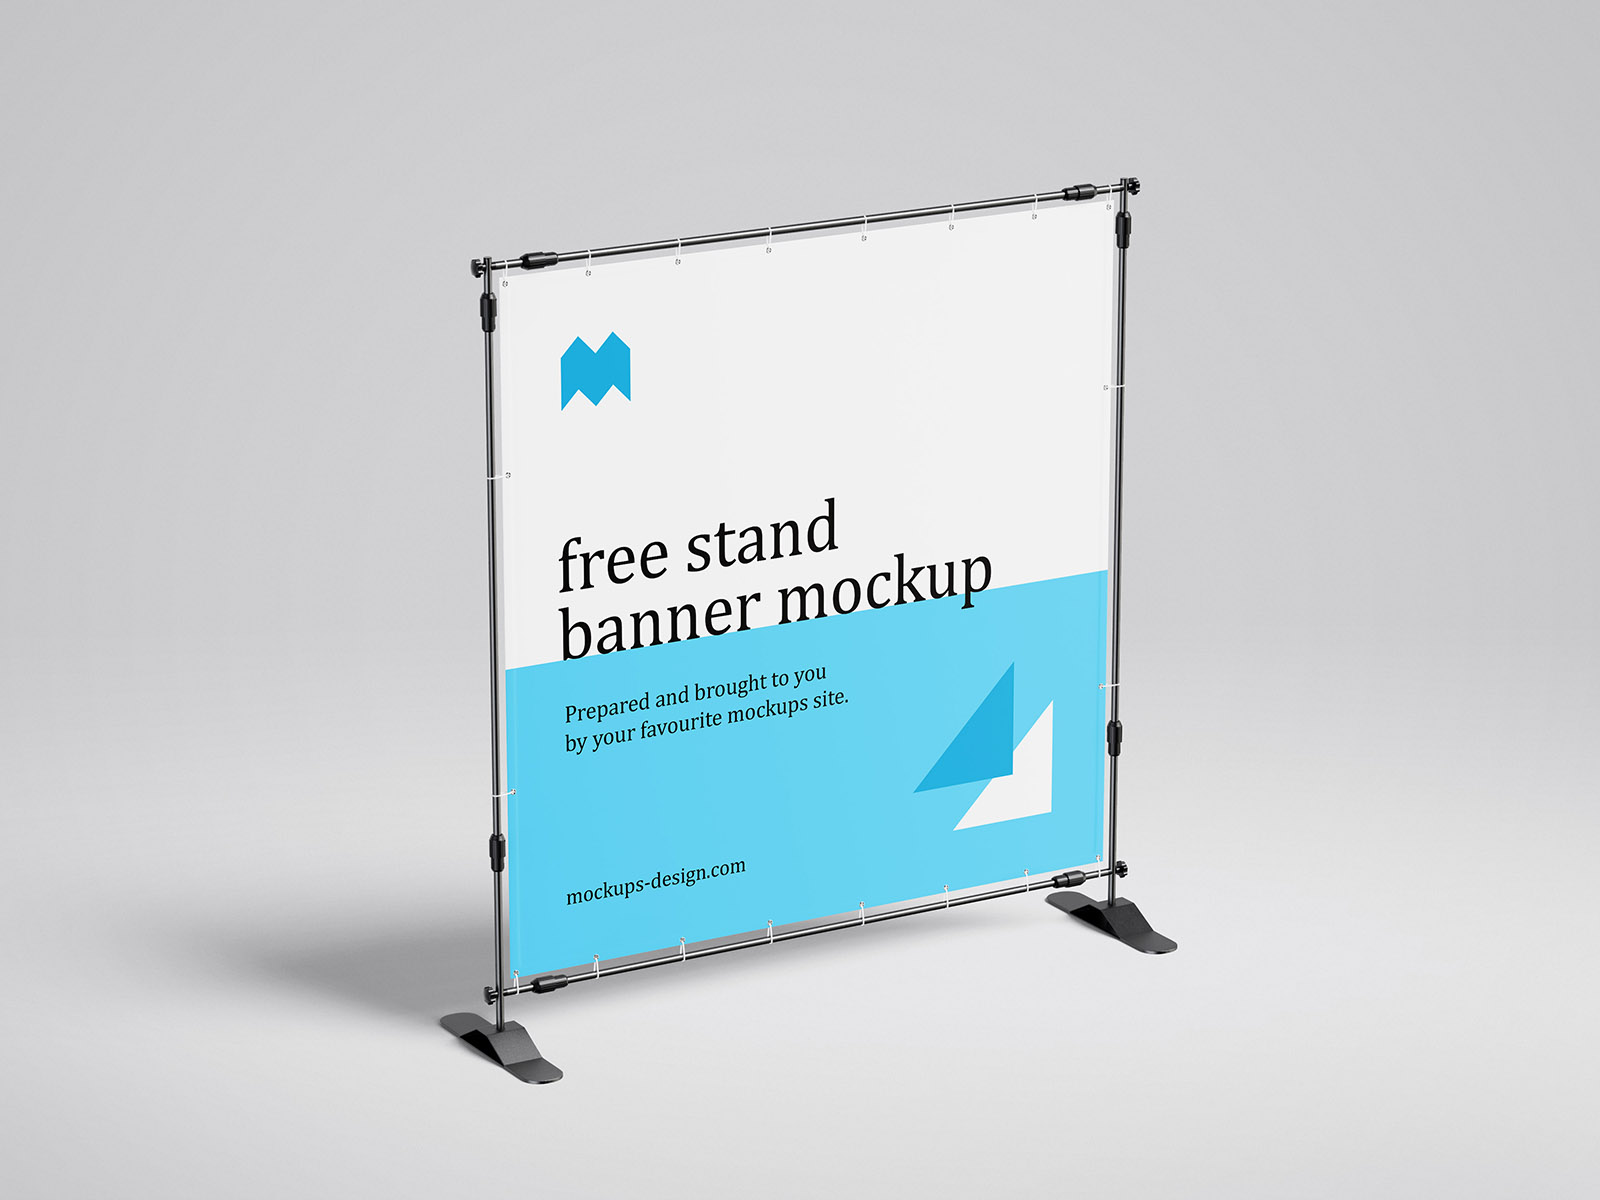 Free banner stand mockup / 200x200 cm